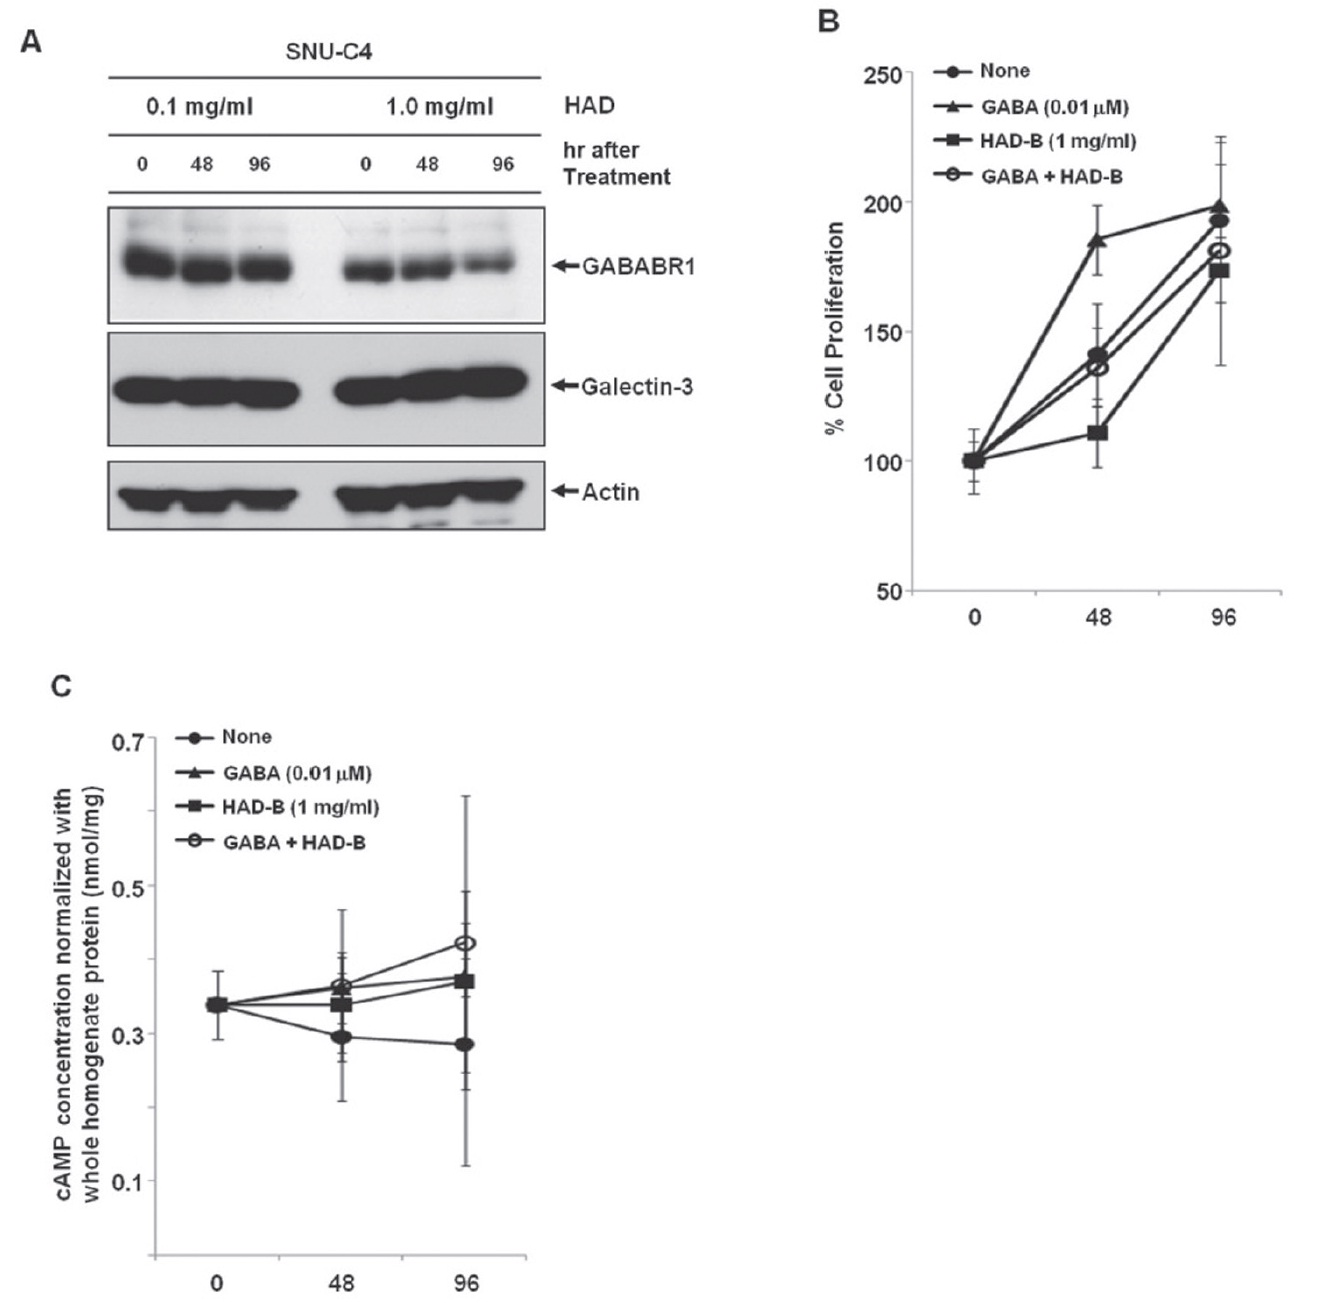 Reduced GABABR1 expression and suppressed cell proliferation of SNU-C4 by treatment with HAD-B. (A) Decreased GABABR1 expression by treatment with HAD-B. At 96 hrs after treatment of with 1 mg/ml HAD-B, protein expression of GABABR1 was decreased in SNU-C4. (B) Suppressed cell proliferation by treatment with HAD-B. GABA treatment recovered the rate of proliferation of SNU-C4 that had been suppressed by HAD-B treatment. (C) Increase in the intracellular cAMP by either GABA or HAD-B treatment. Treatment with GABA or HAD-B increased the basal level of intracellular cAMP.